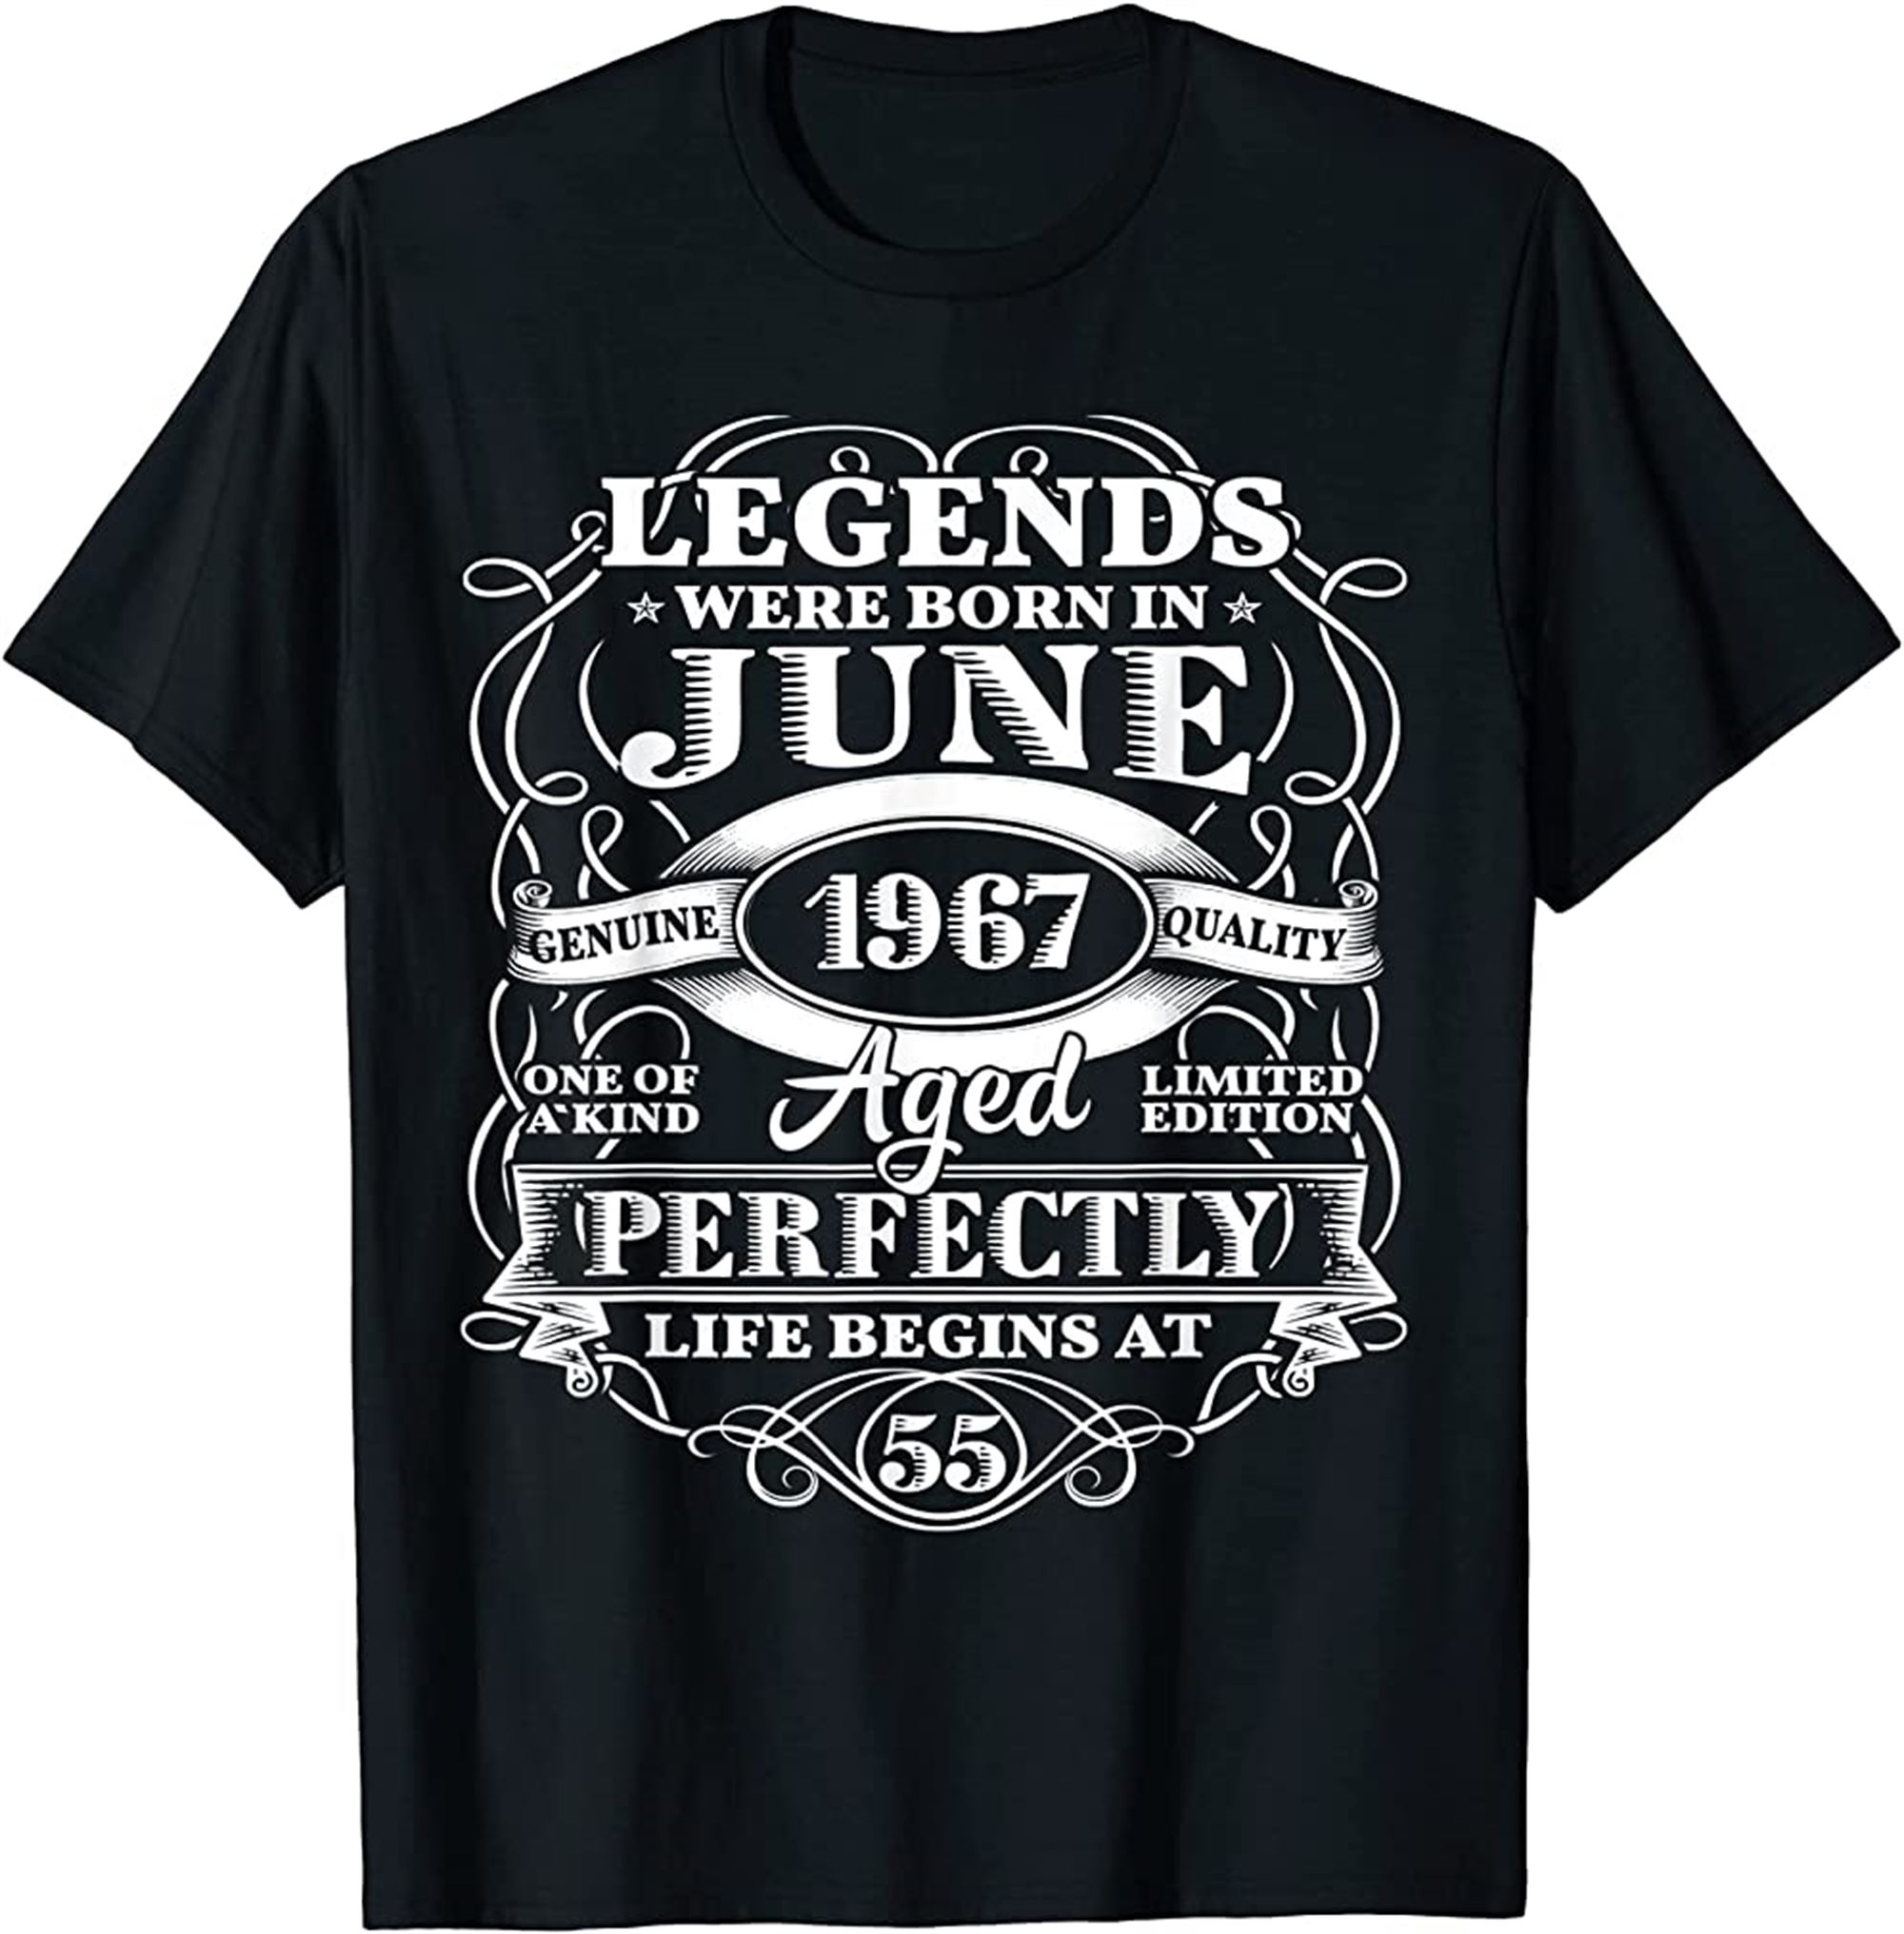 55th Birthday Gift For Legends Born June 1967 55 Years Old T-shirt Full Size Up To 5xl